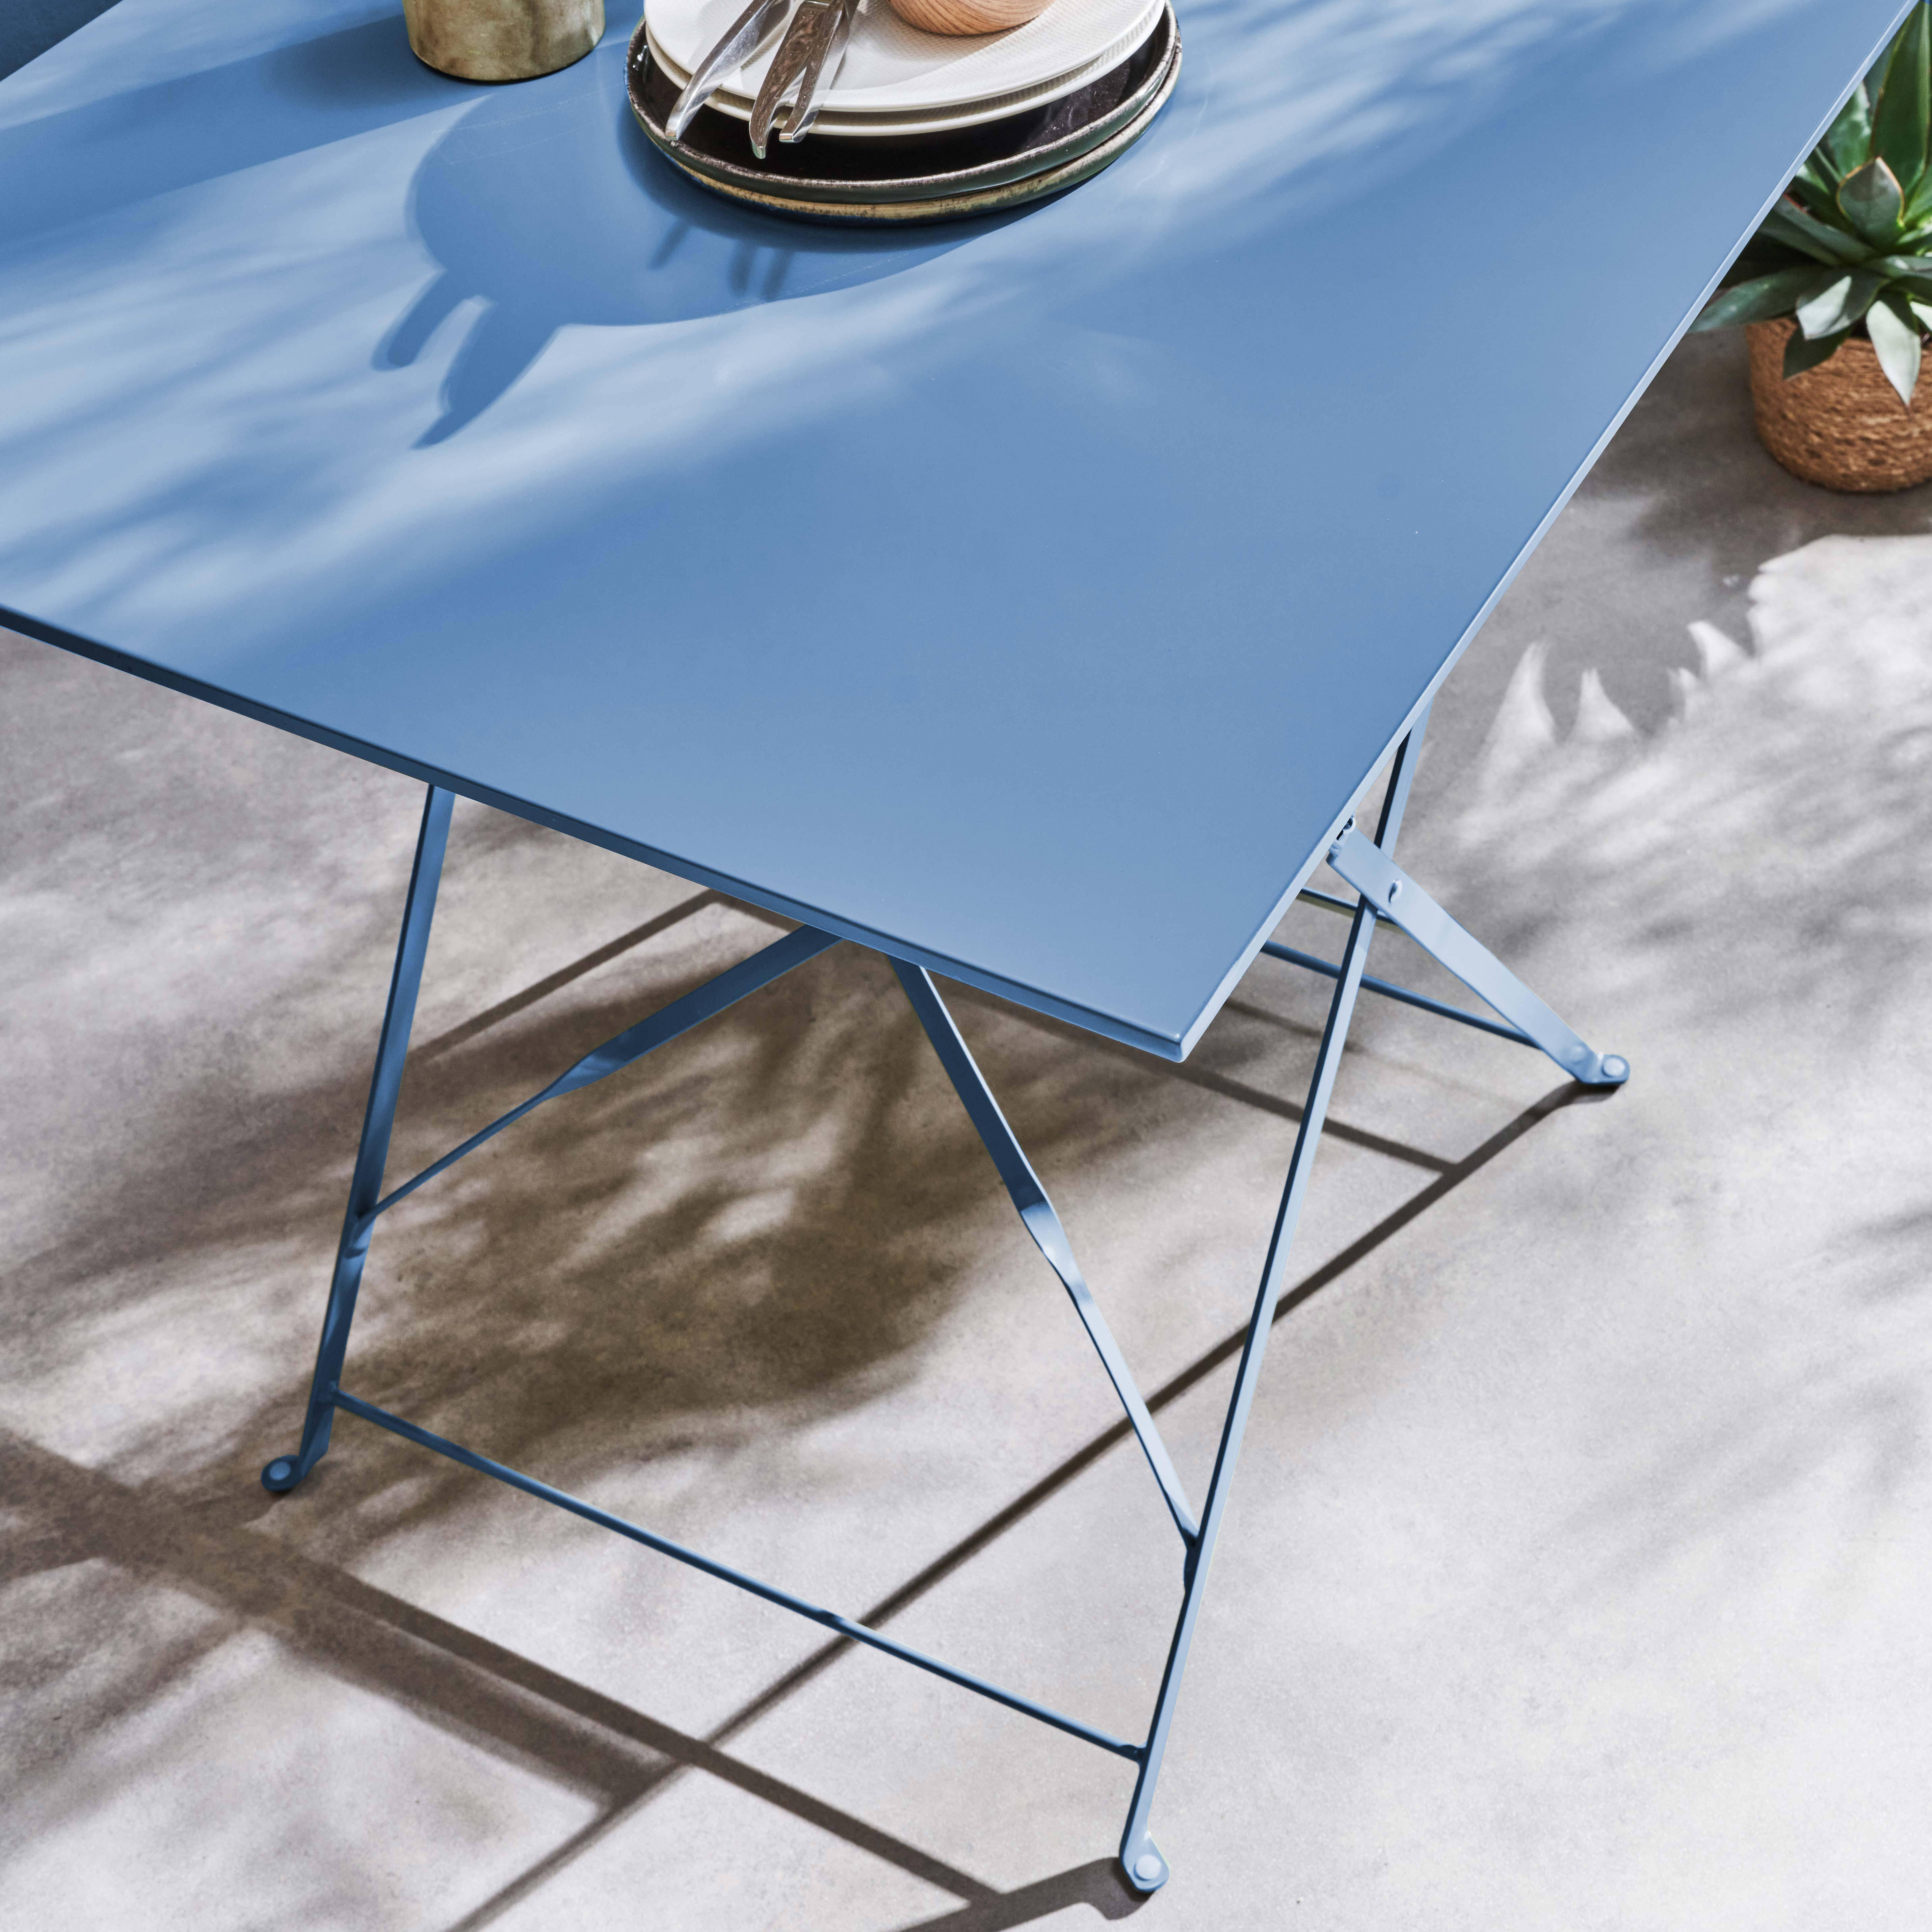 2-seater foldable thermo-lacquered steel bistro garden table, 70x70cm - Emilia - Blue grey,sweeek,Photo2